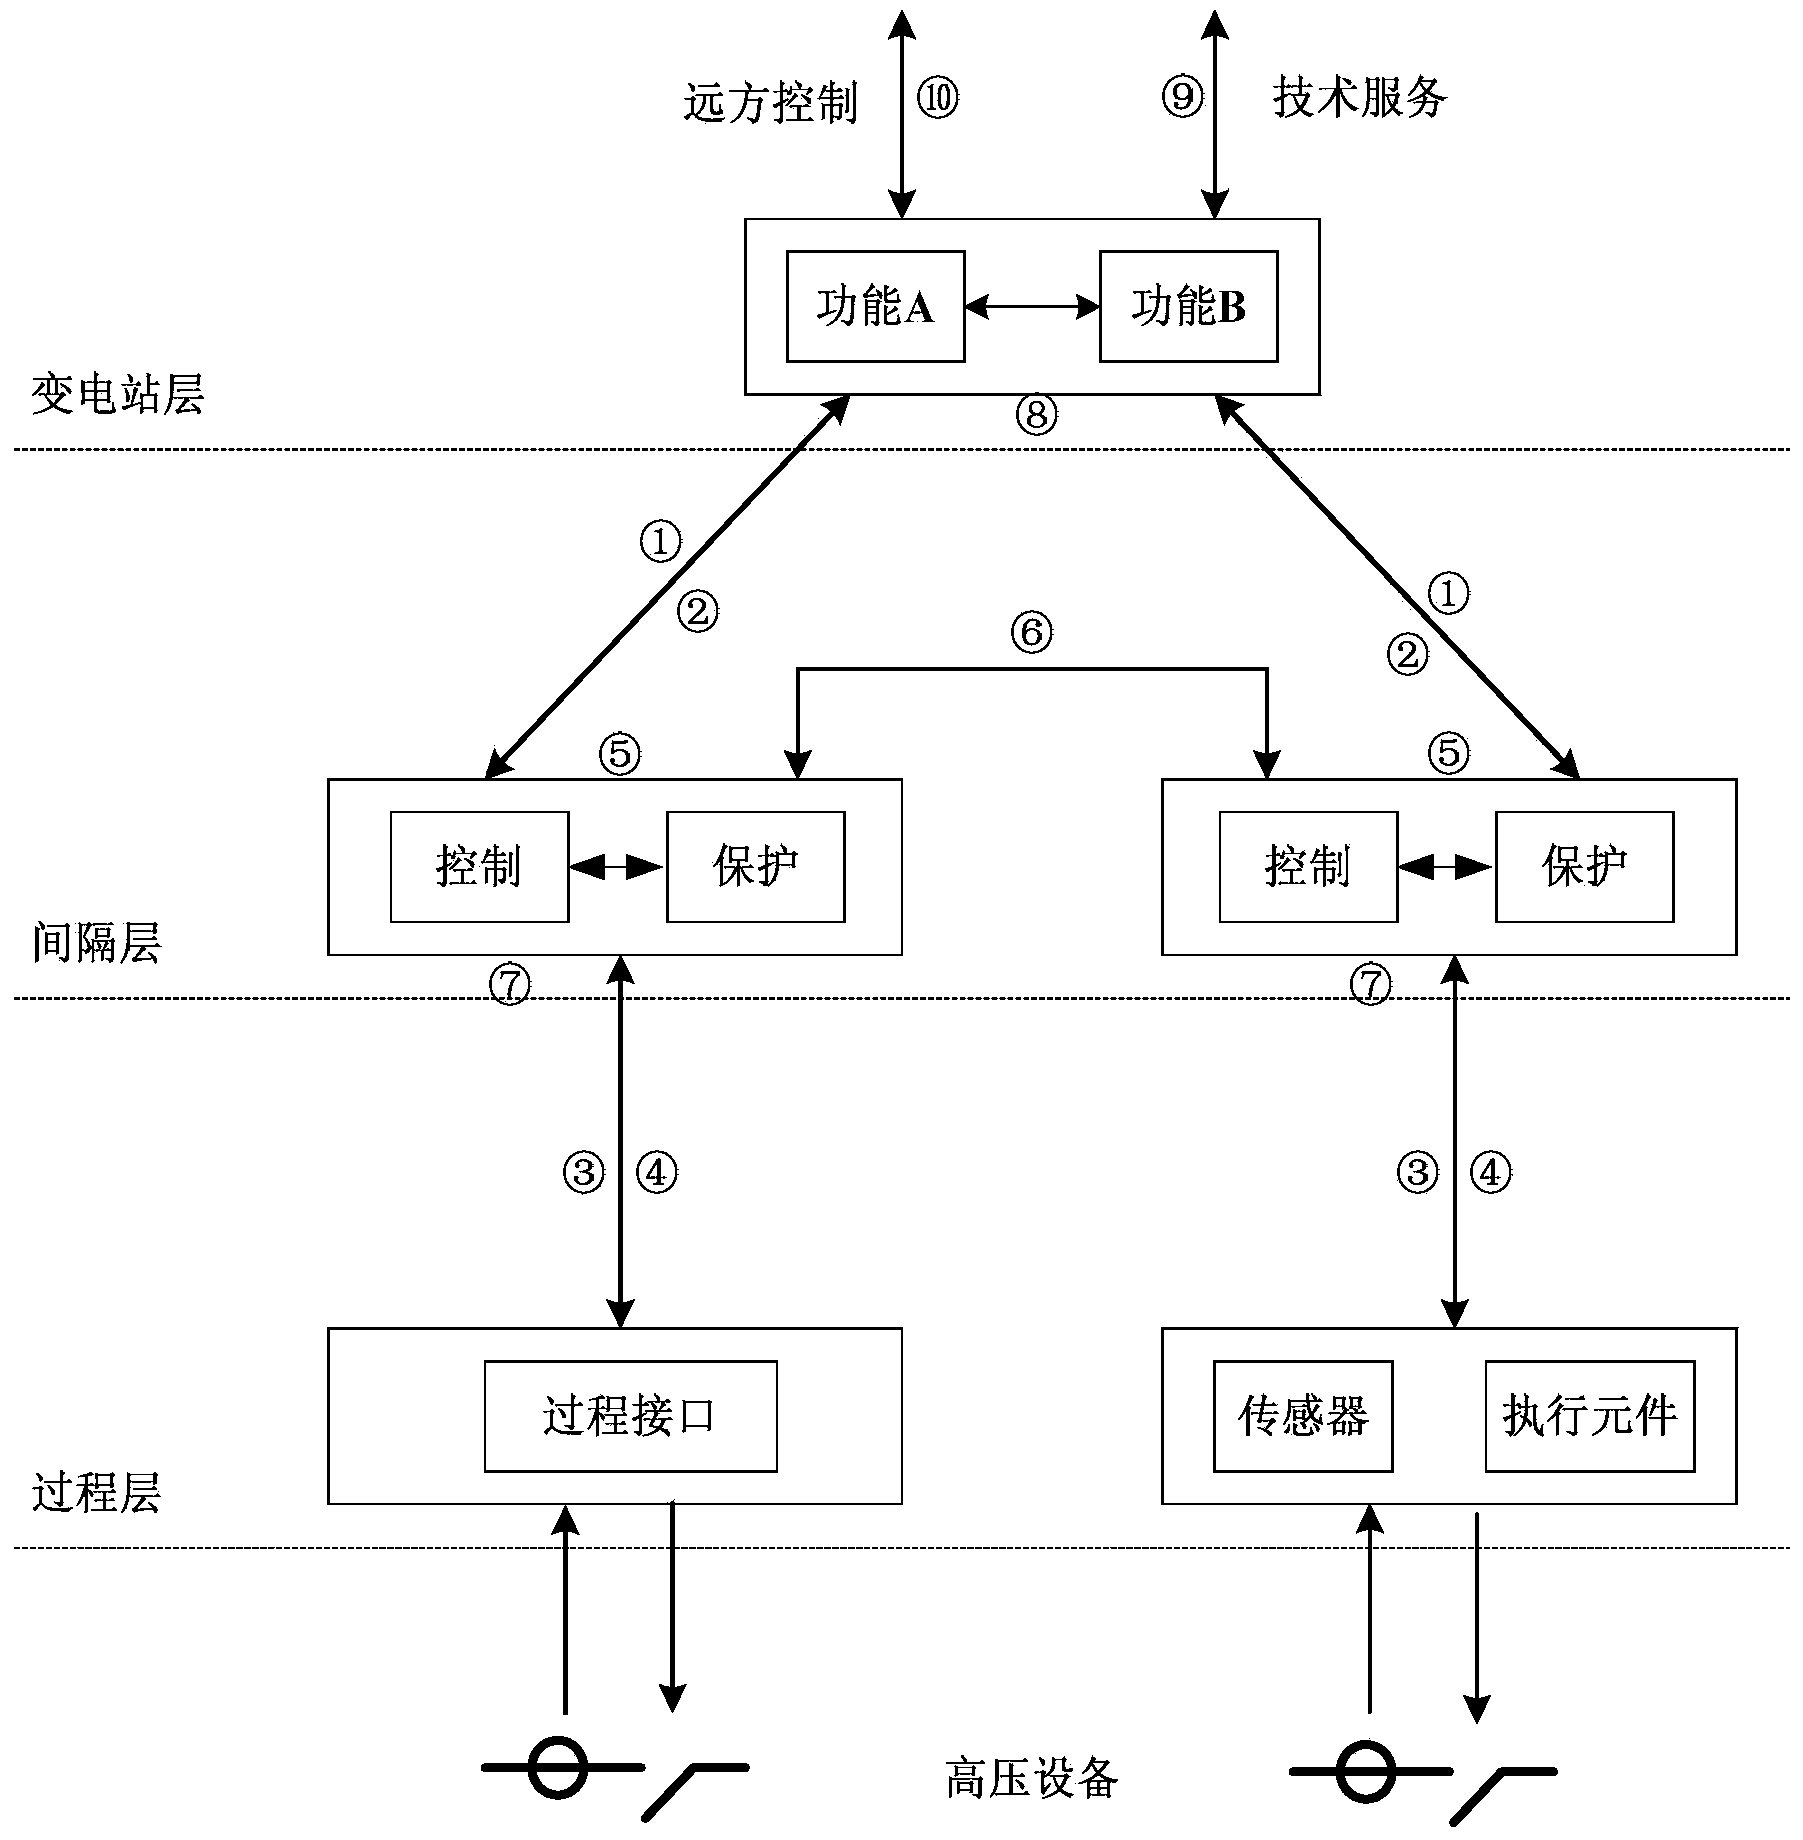 System and method for synchronization of communication network and time in intelligent transformer substation